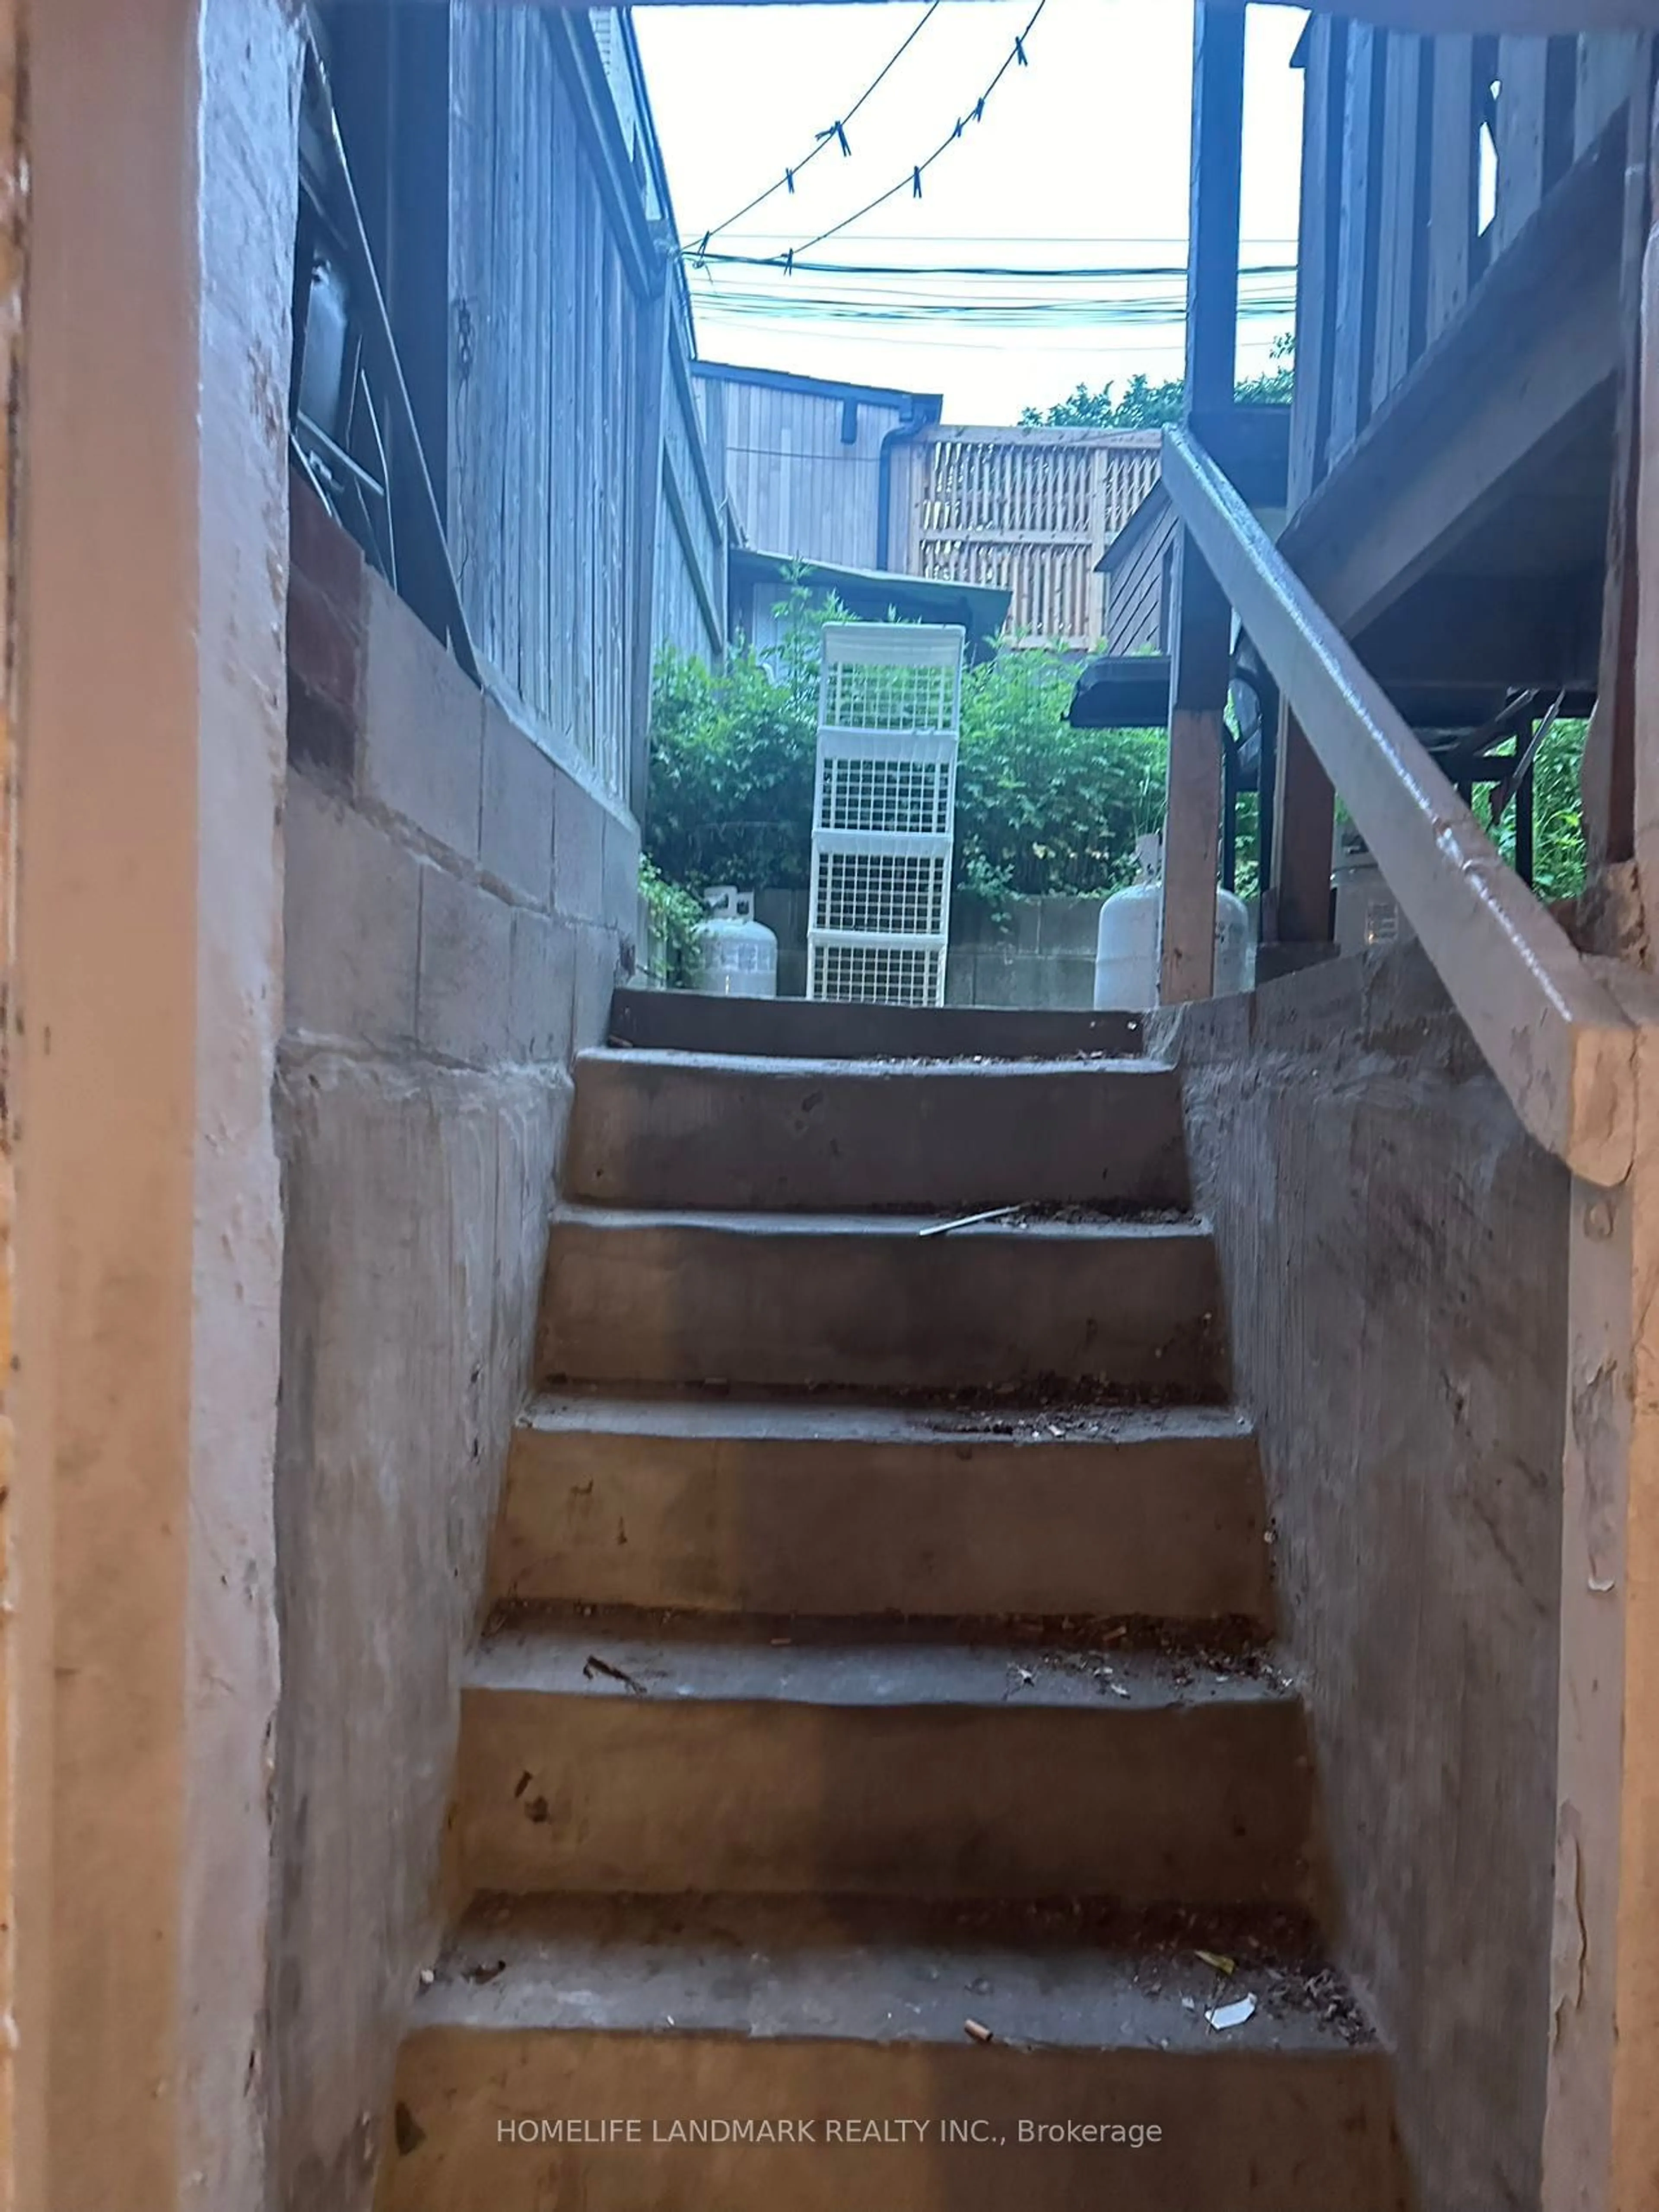 Stairs for 487 Carlaw Ave, Toronto Ontario M4K 3H9